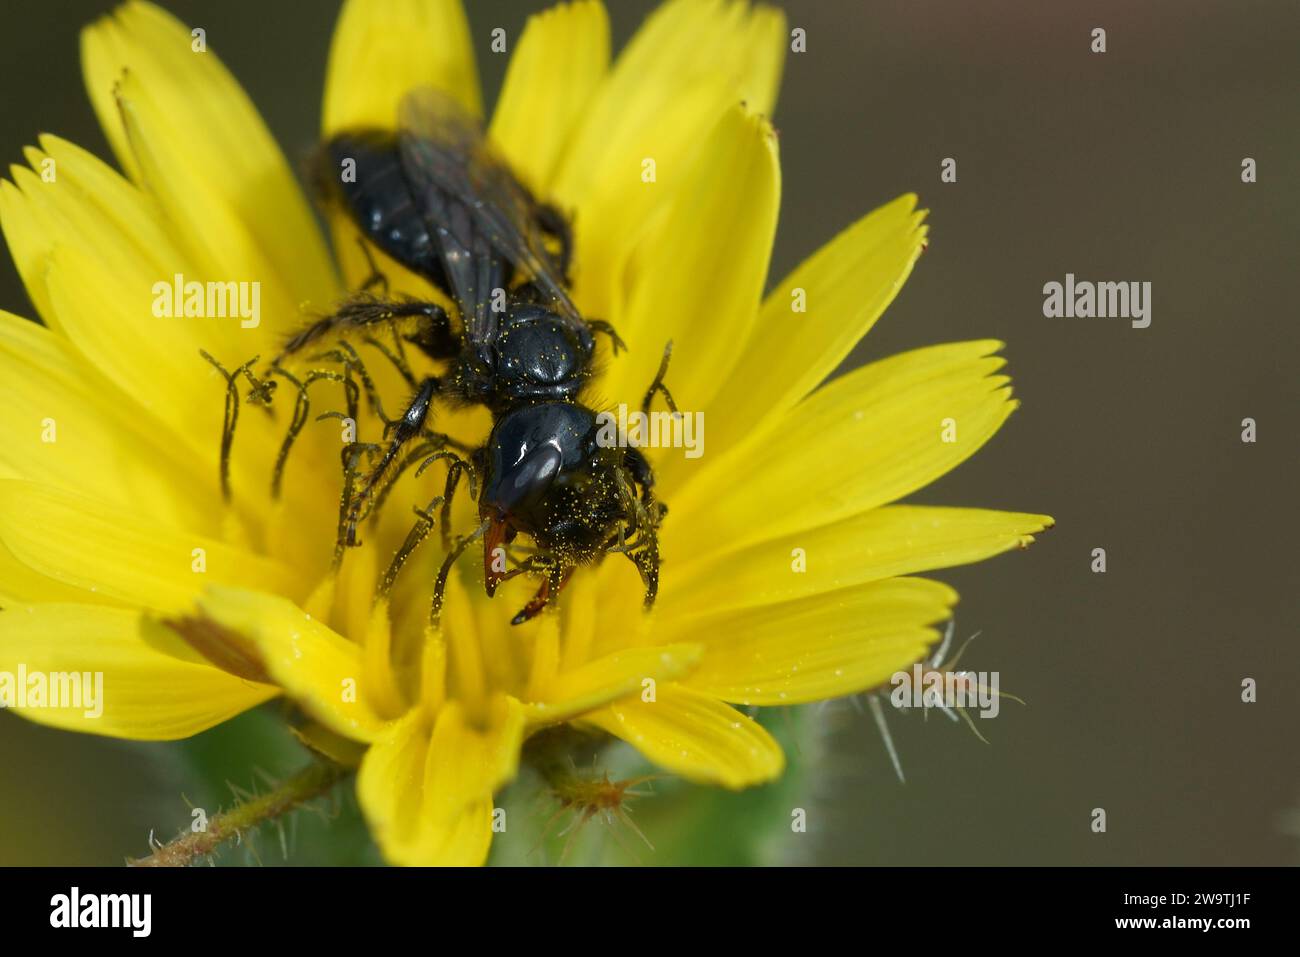 Natural colorful closeup on a black and sparsely-haired andrenid solitary bee, Panurgus in a yellow flower Stock Photo